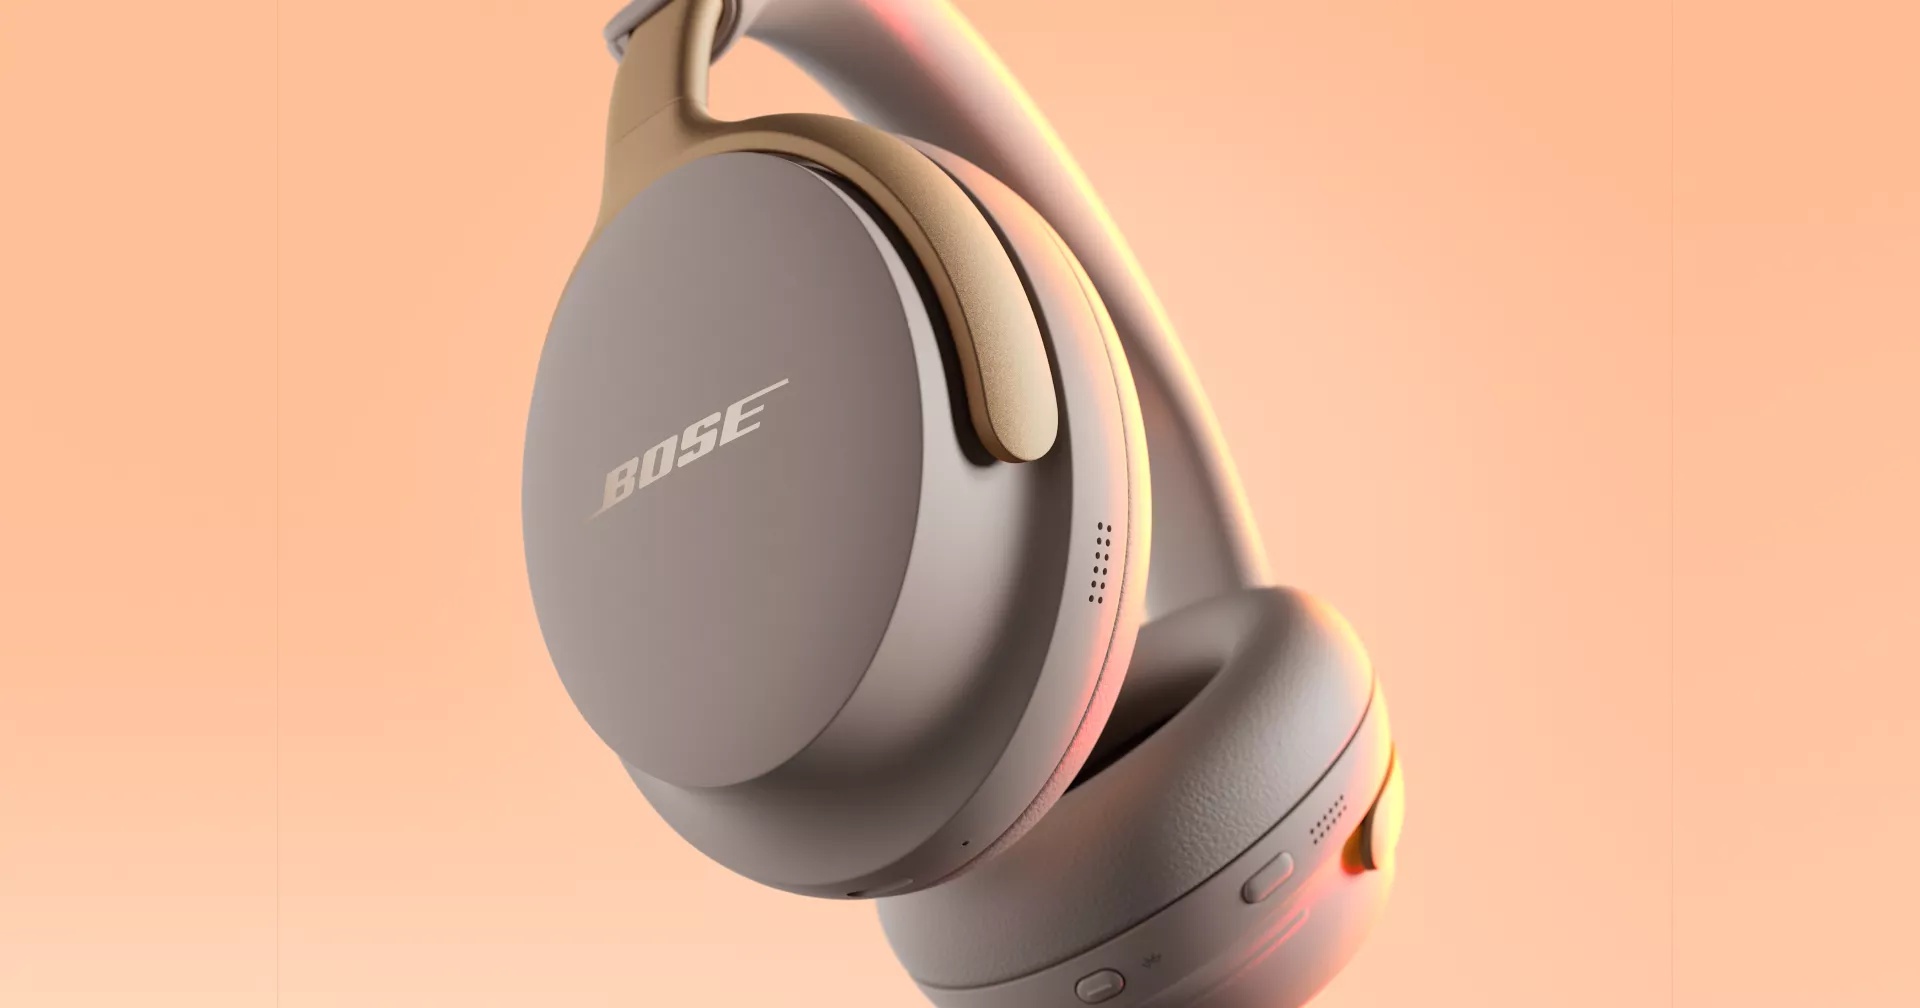 Bose QuietComfort Ultra Wireless Noise Cancelling Over-the-Ear